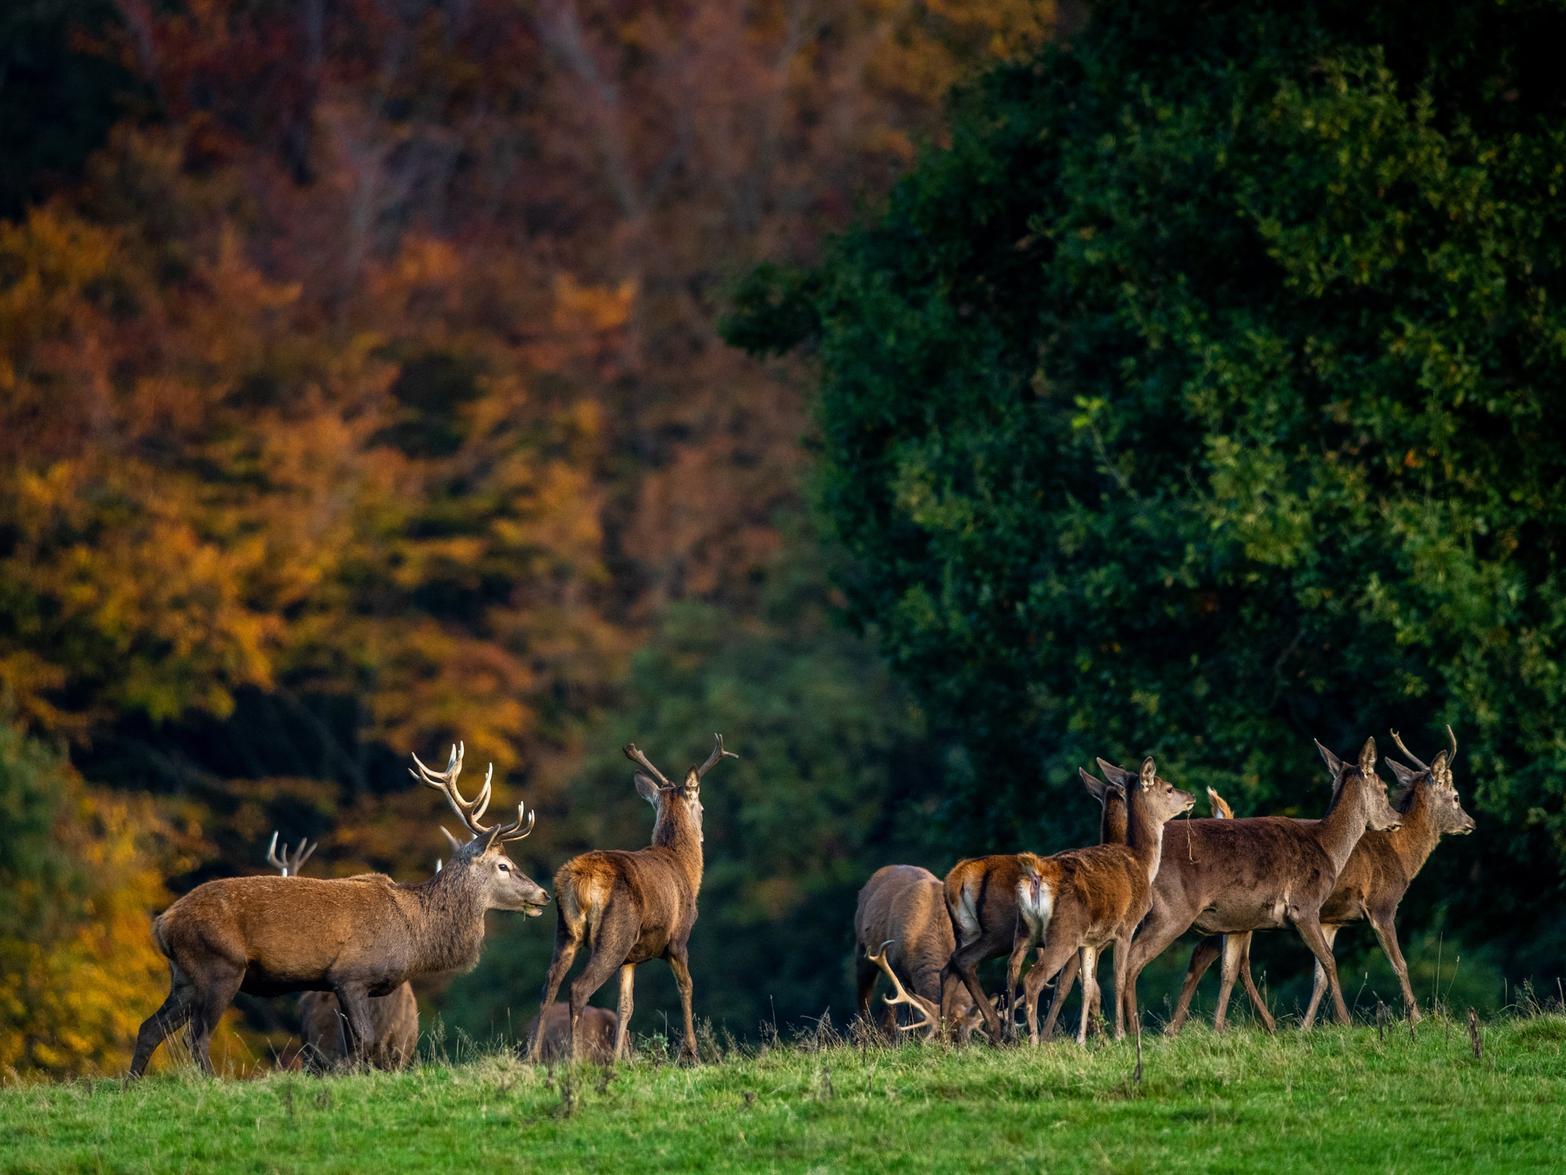 This image of stags at Harewood House was captured by snapper James Hardisty.